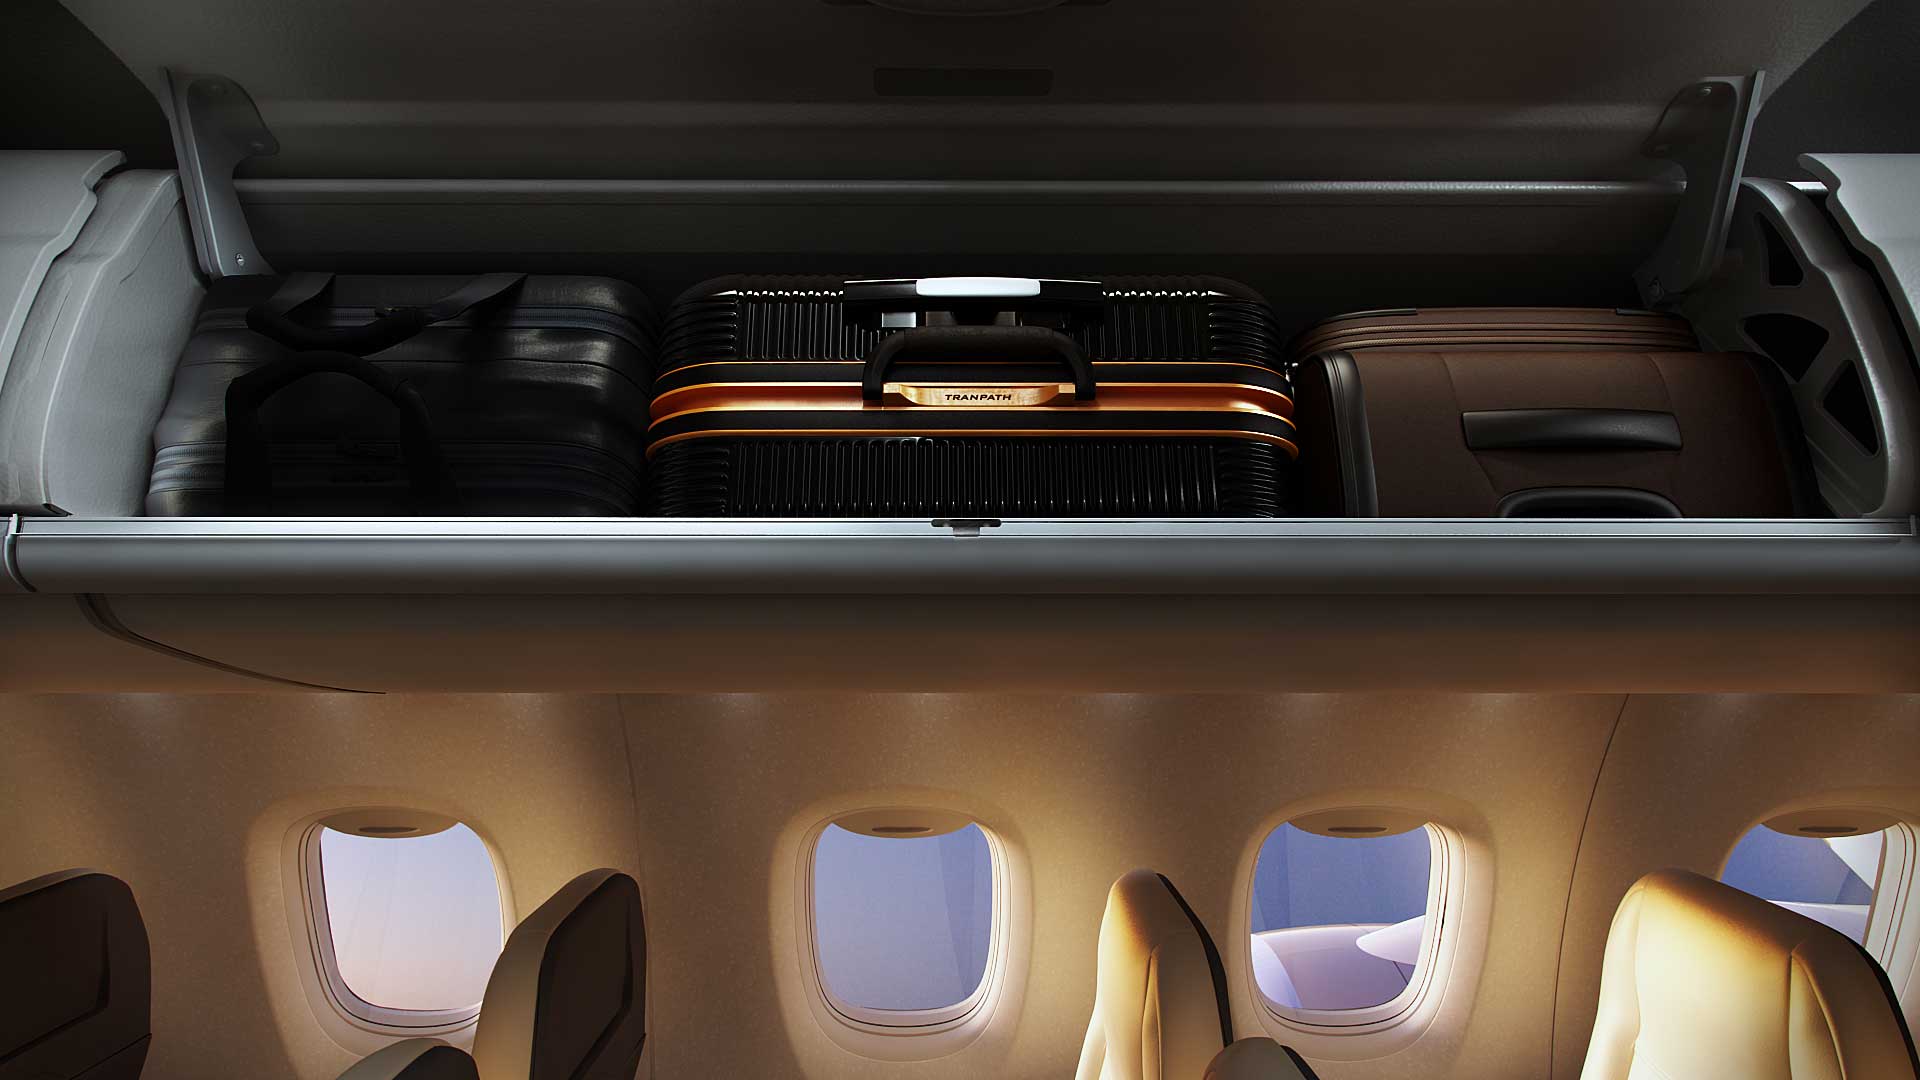 The MRJ's overhead bins can accommodate the maximum-sized carry-on bags currently allowed by airlines